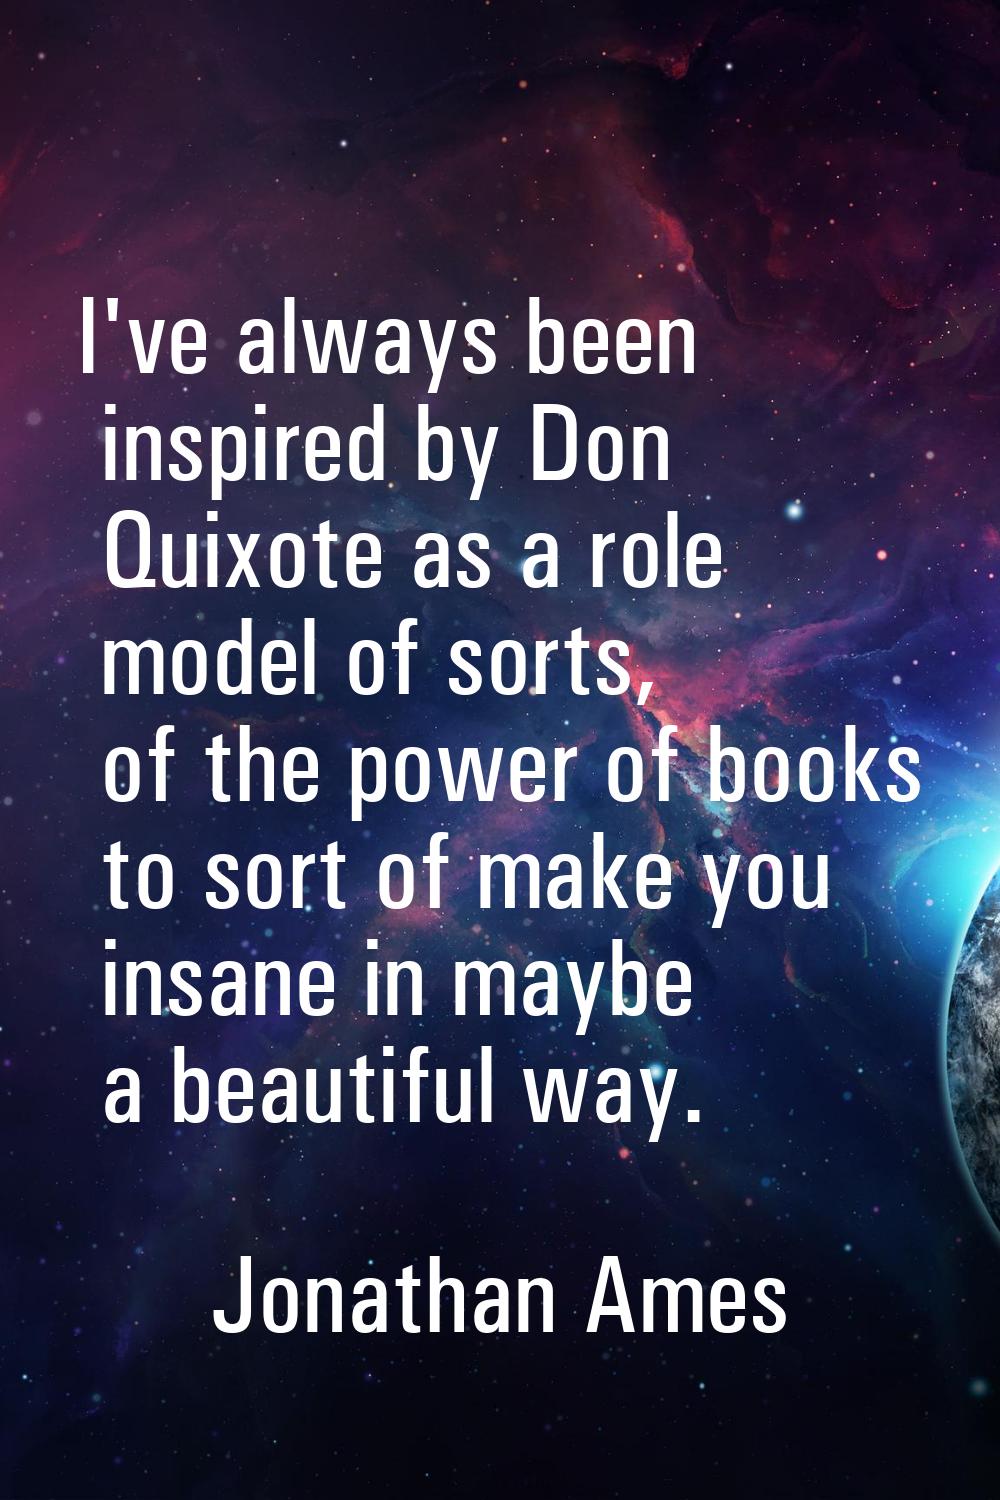 I've always been inspired by Don Quixote as a role model of sorts, of the power of books to sort of